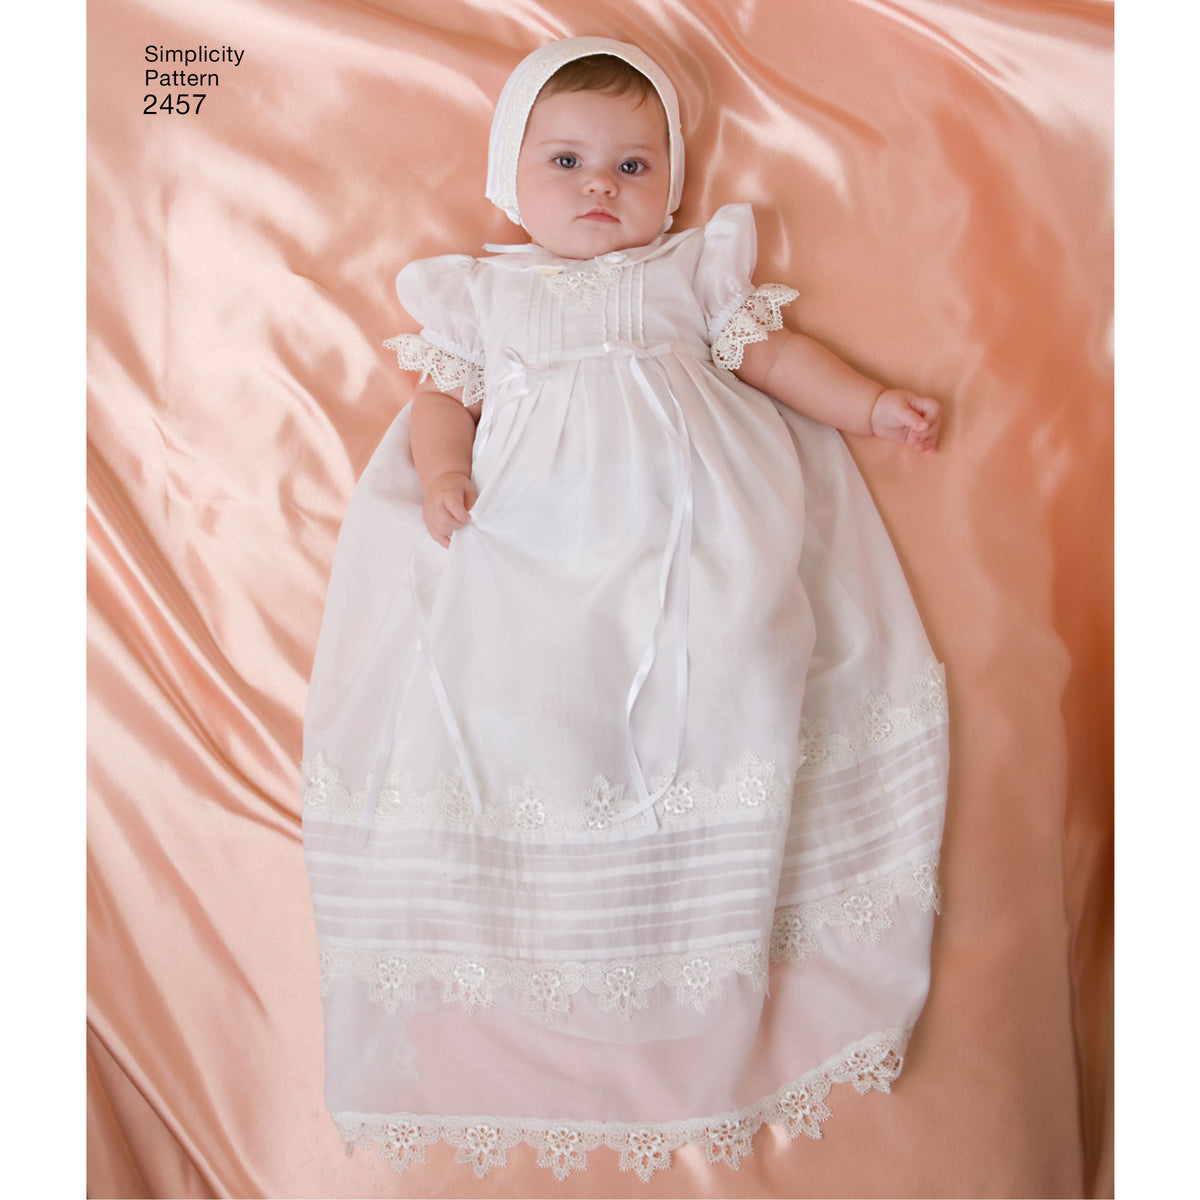 Christening Gowns - Couture Bridal Gowns by Angelina Brady-Batty 